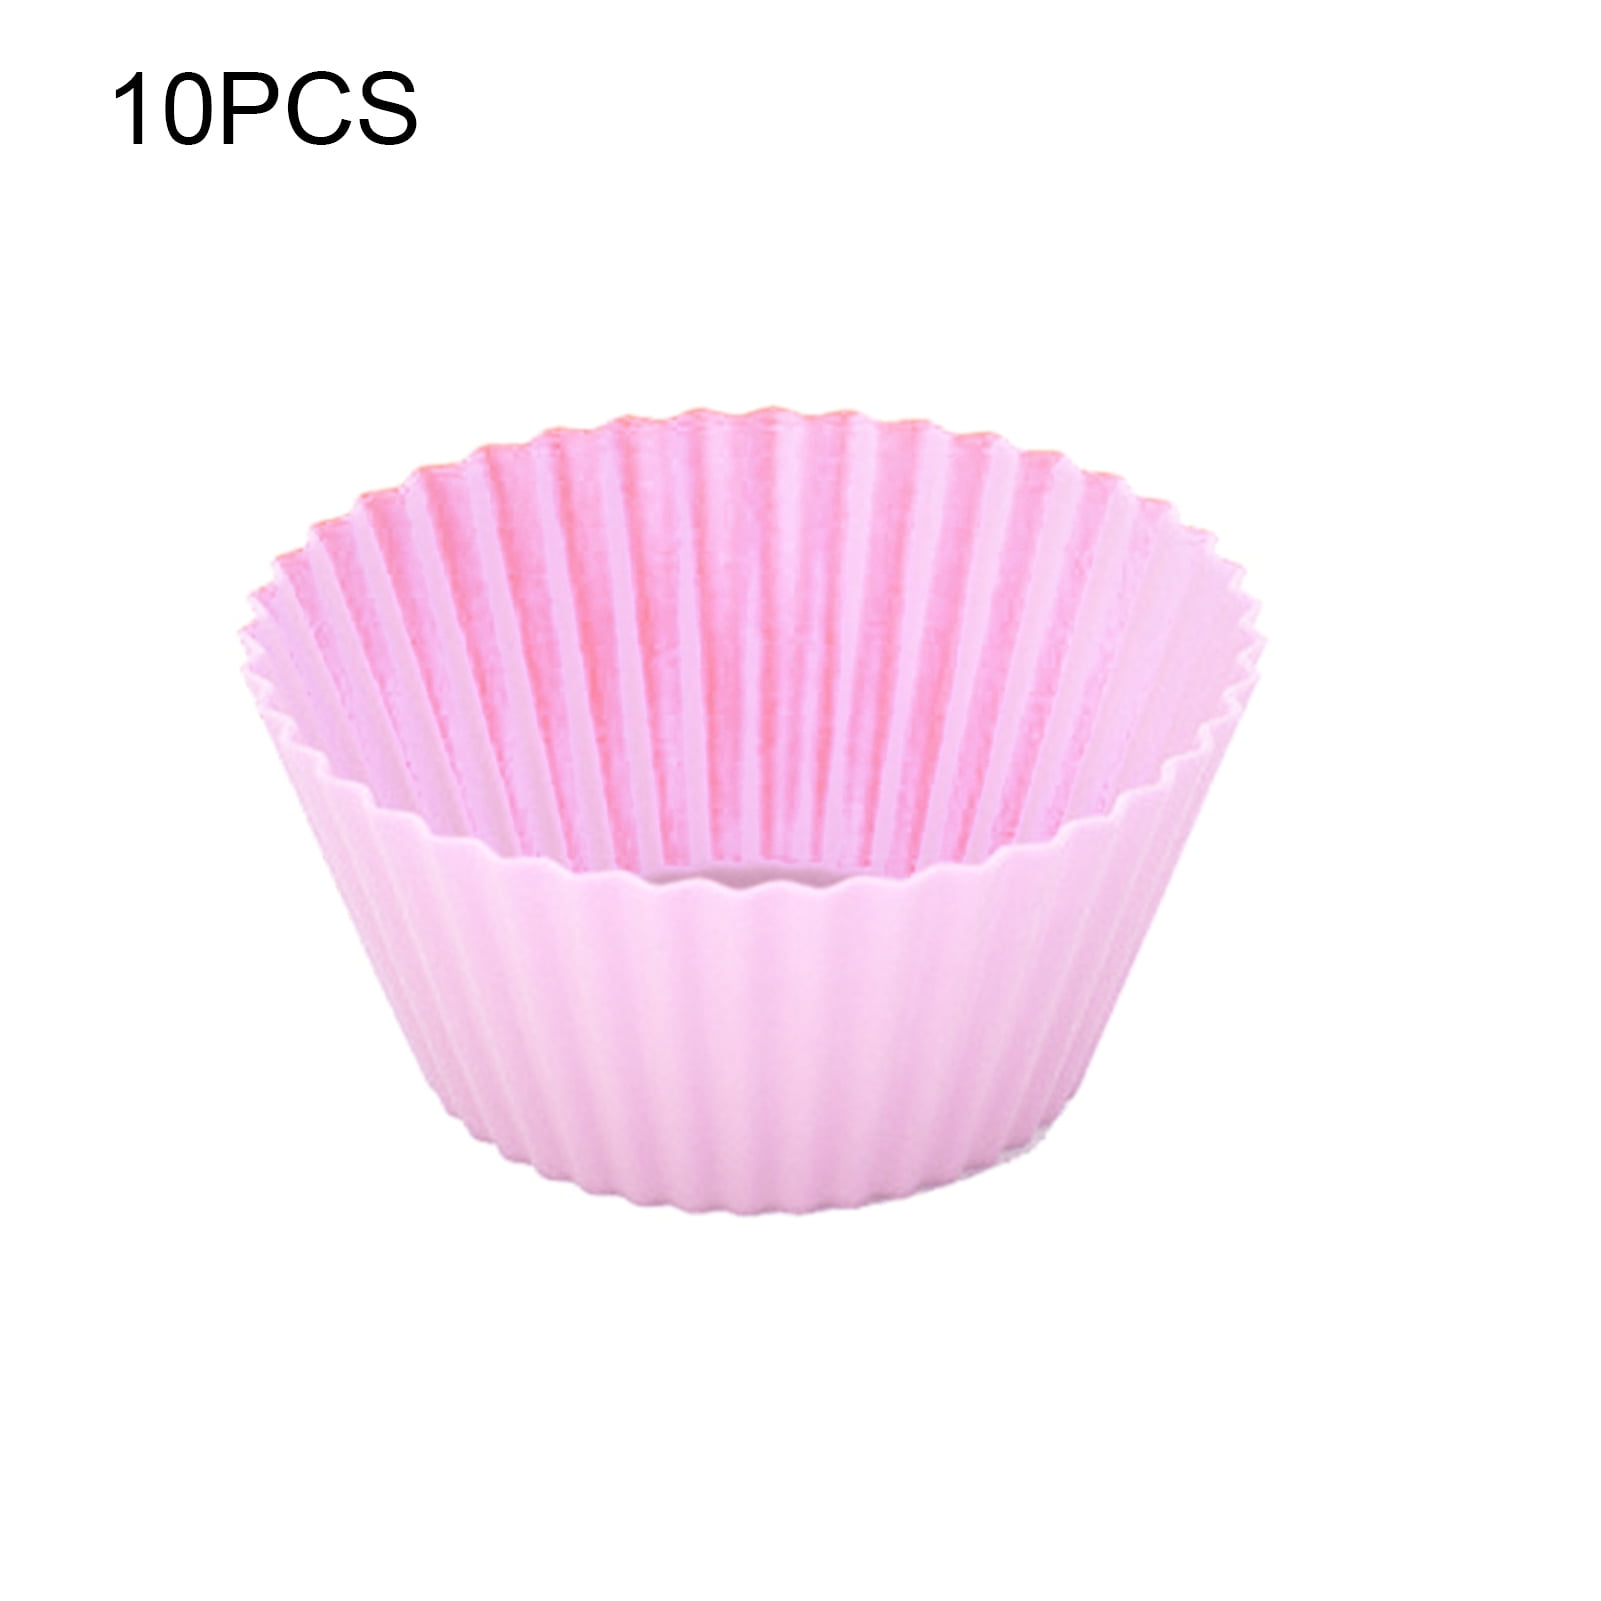 10Pcs 7cm Mini Baking Cake Cup Mold Round Silicone DIY Decoration Tool Durable 